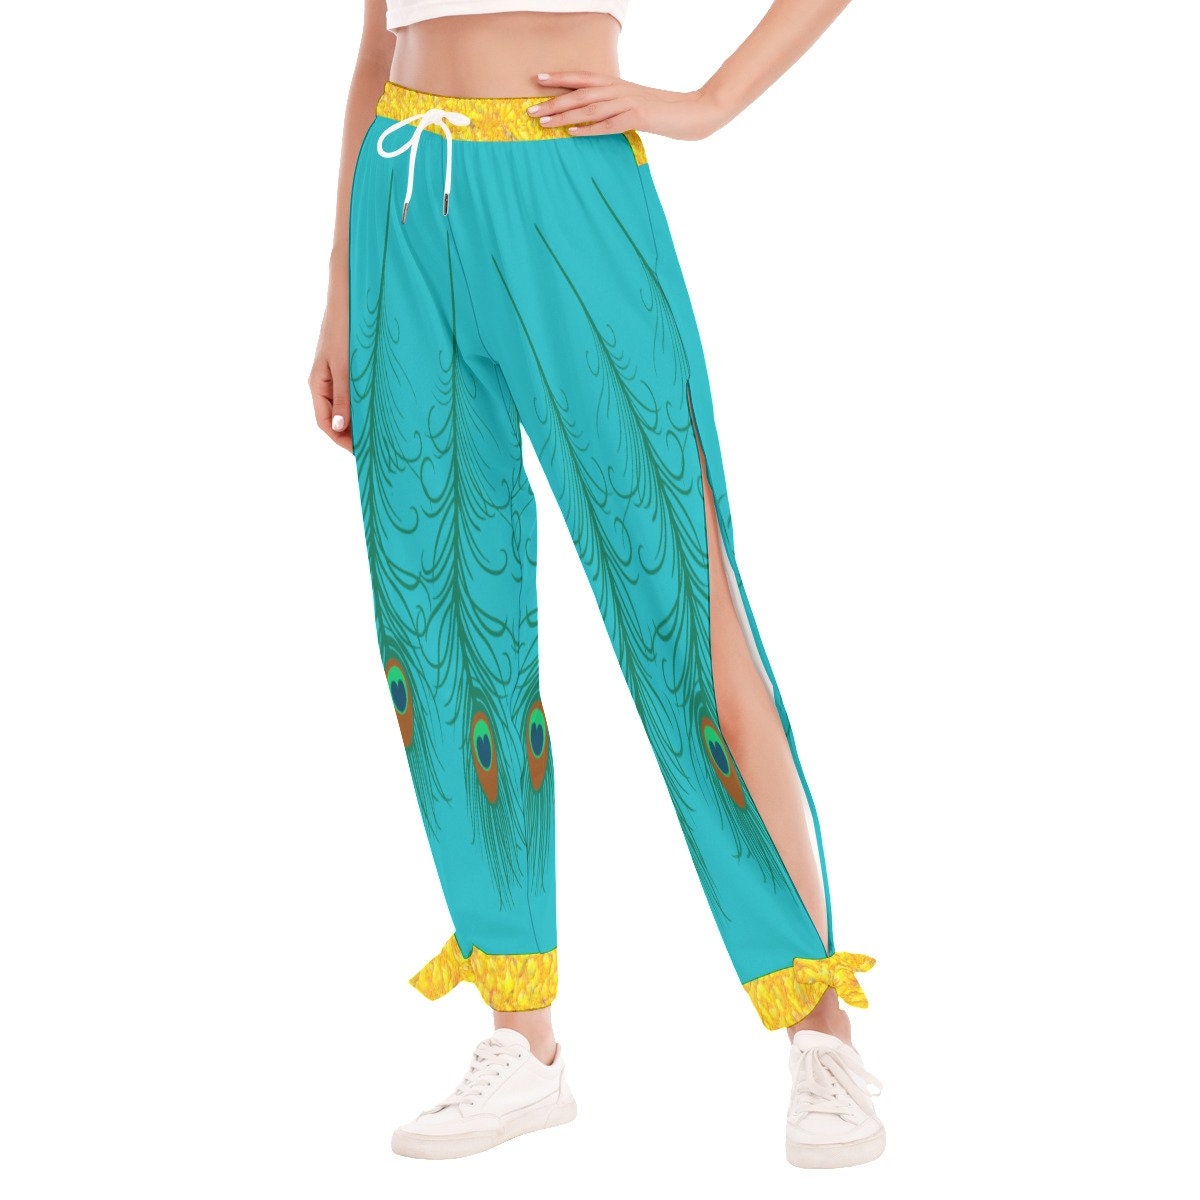 Princess Jasmine Inspired Gold Accents Women's Pants & matchings Tops, Cosplay, Birthday Party, Adult Halloween Costume, Gift for Her